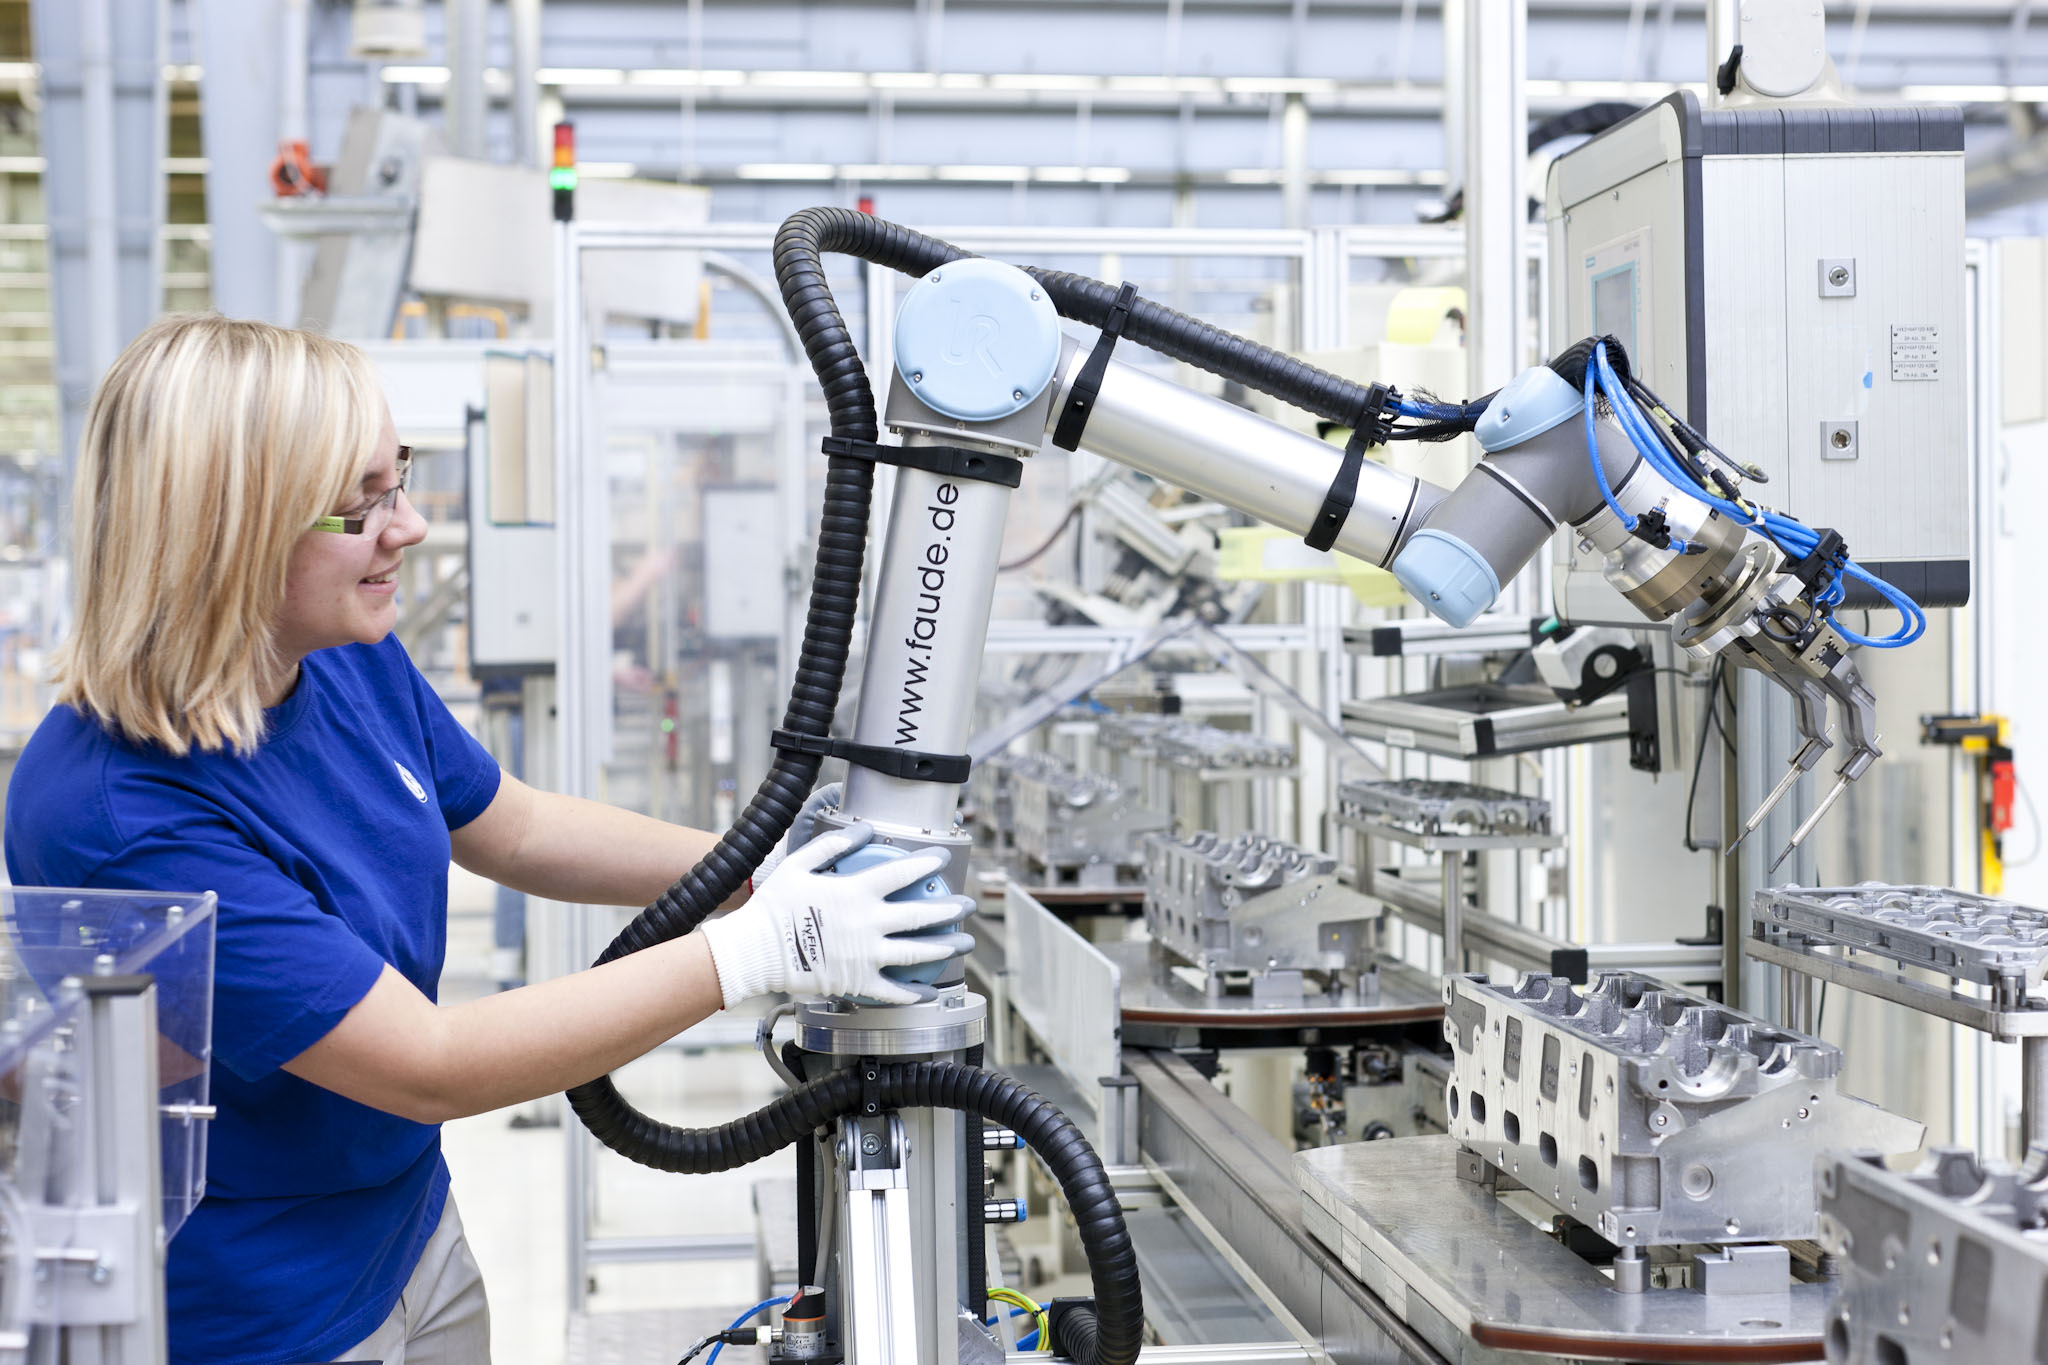 Universal Robots Release their New Generation of Collaborative Robots